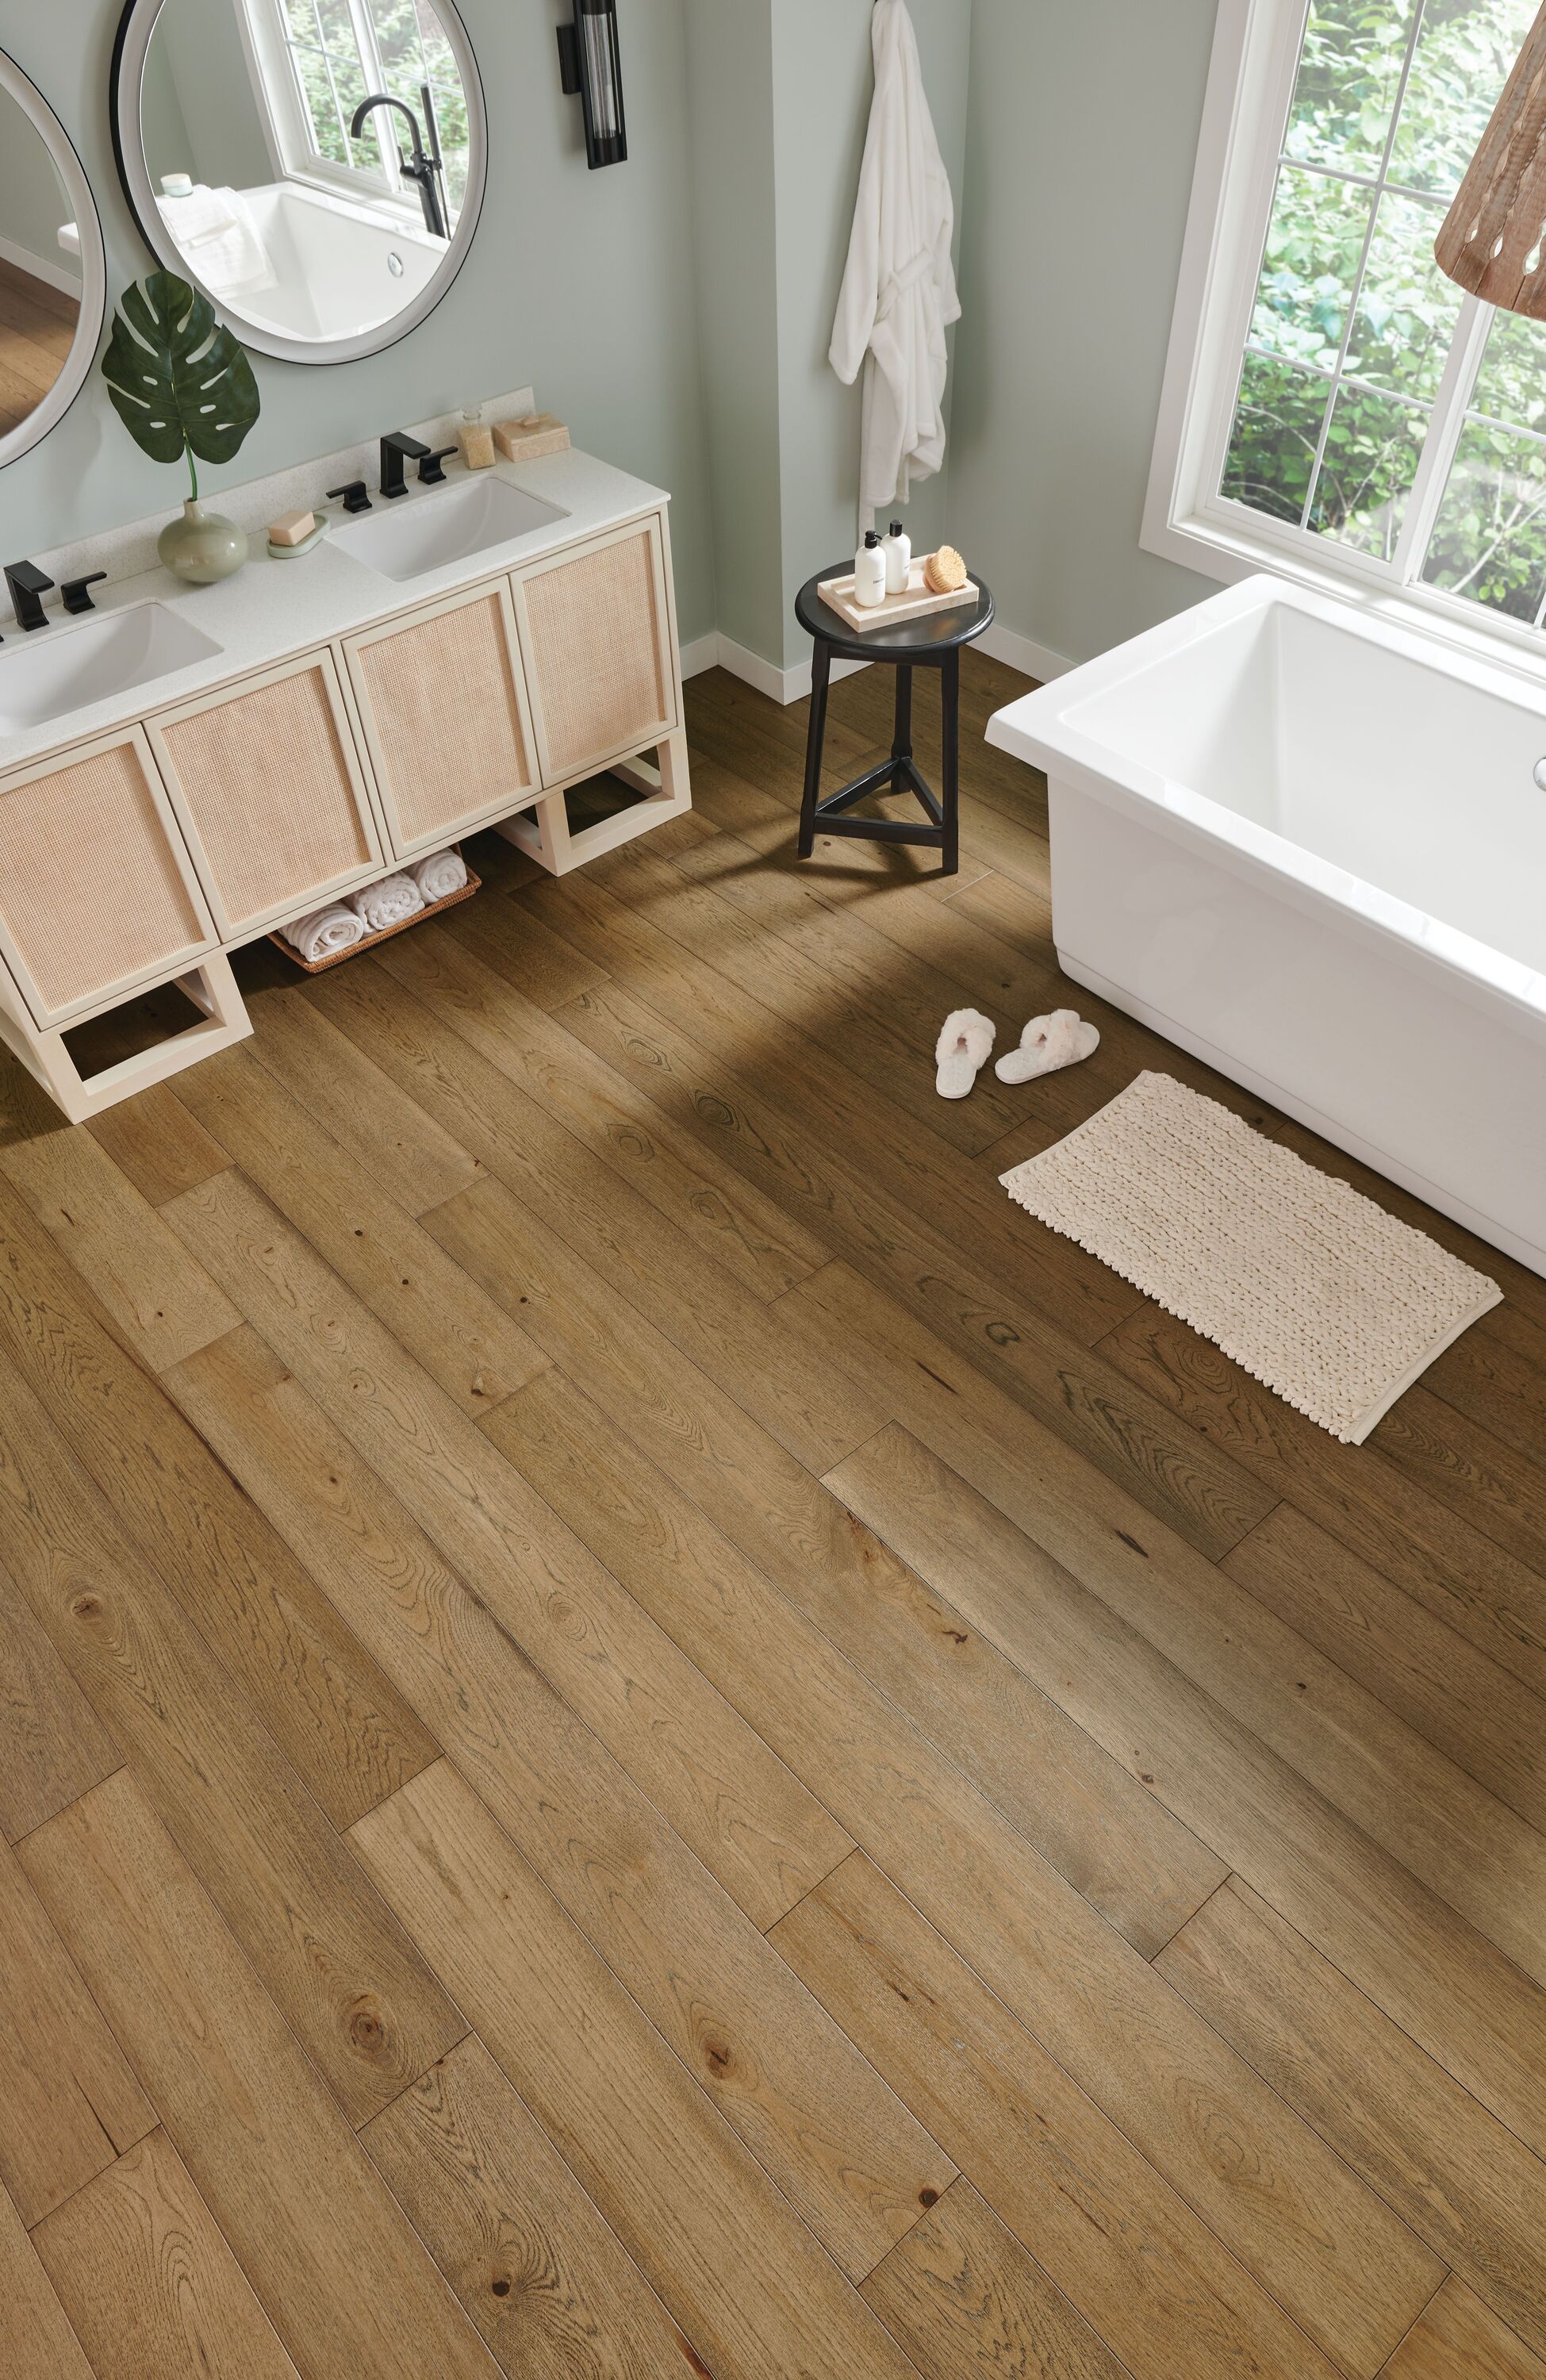 Bruce Forest Rain Calming Tea Hickory 7-7/16-in W x 1/4-in T x Varying Length Wirebrushed Waterproof Engineered Hardwood Flooring (15.54-sq ft) in the Hardwood Flooring department Lowes.com